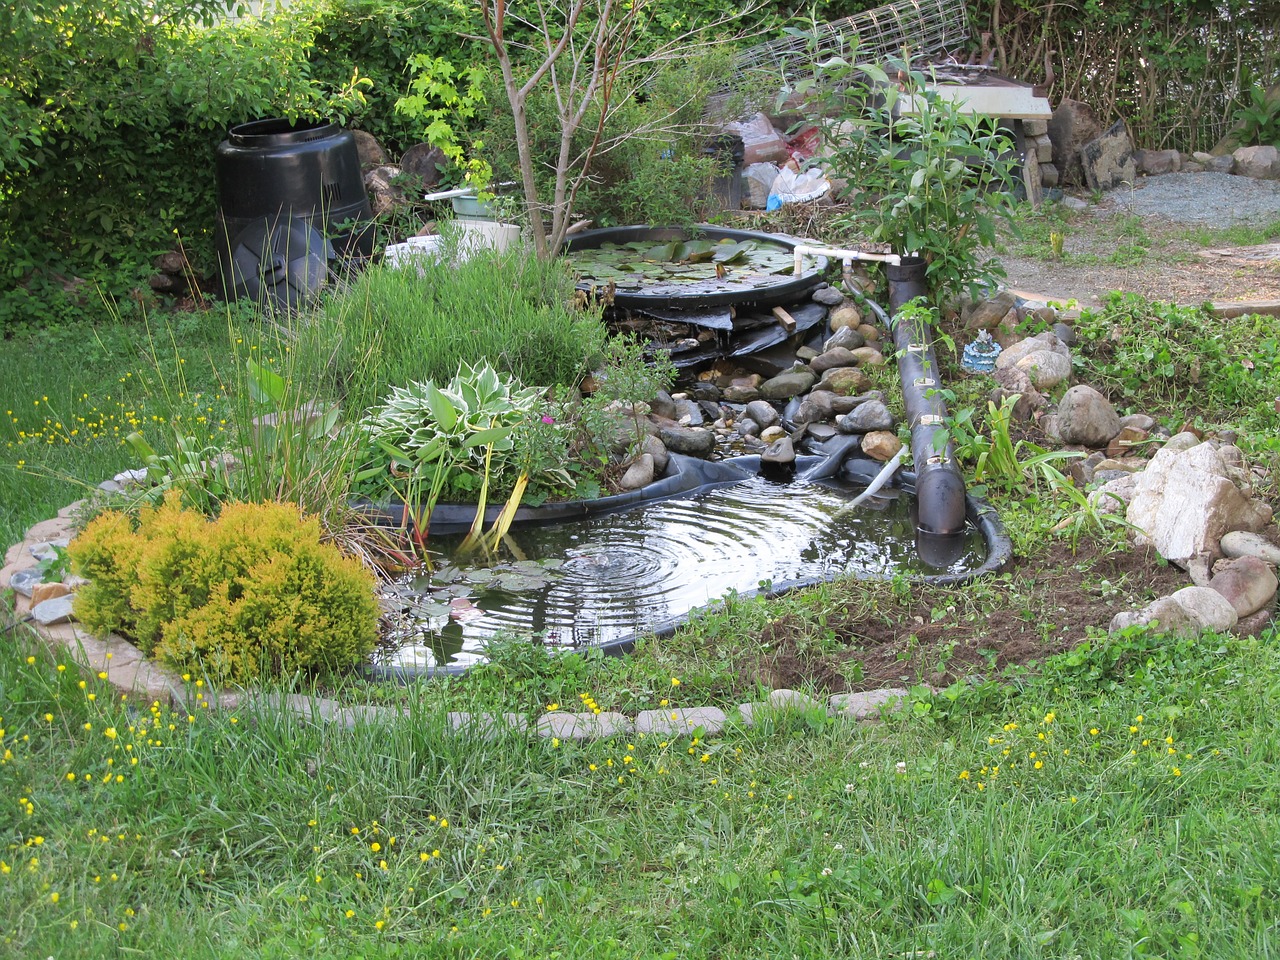 DIY - Build a Natural Fish Pond in Your Backyard | WorldWide Aquaculture